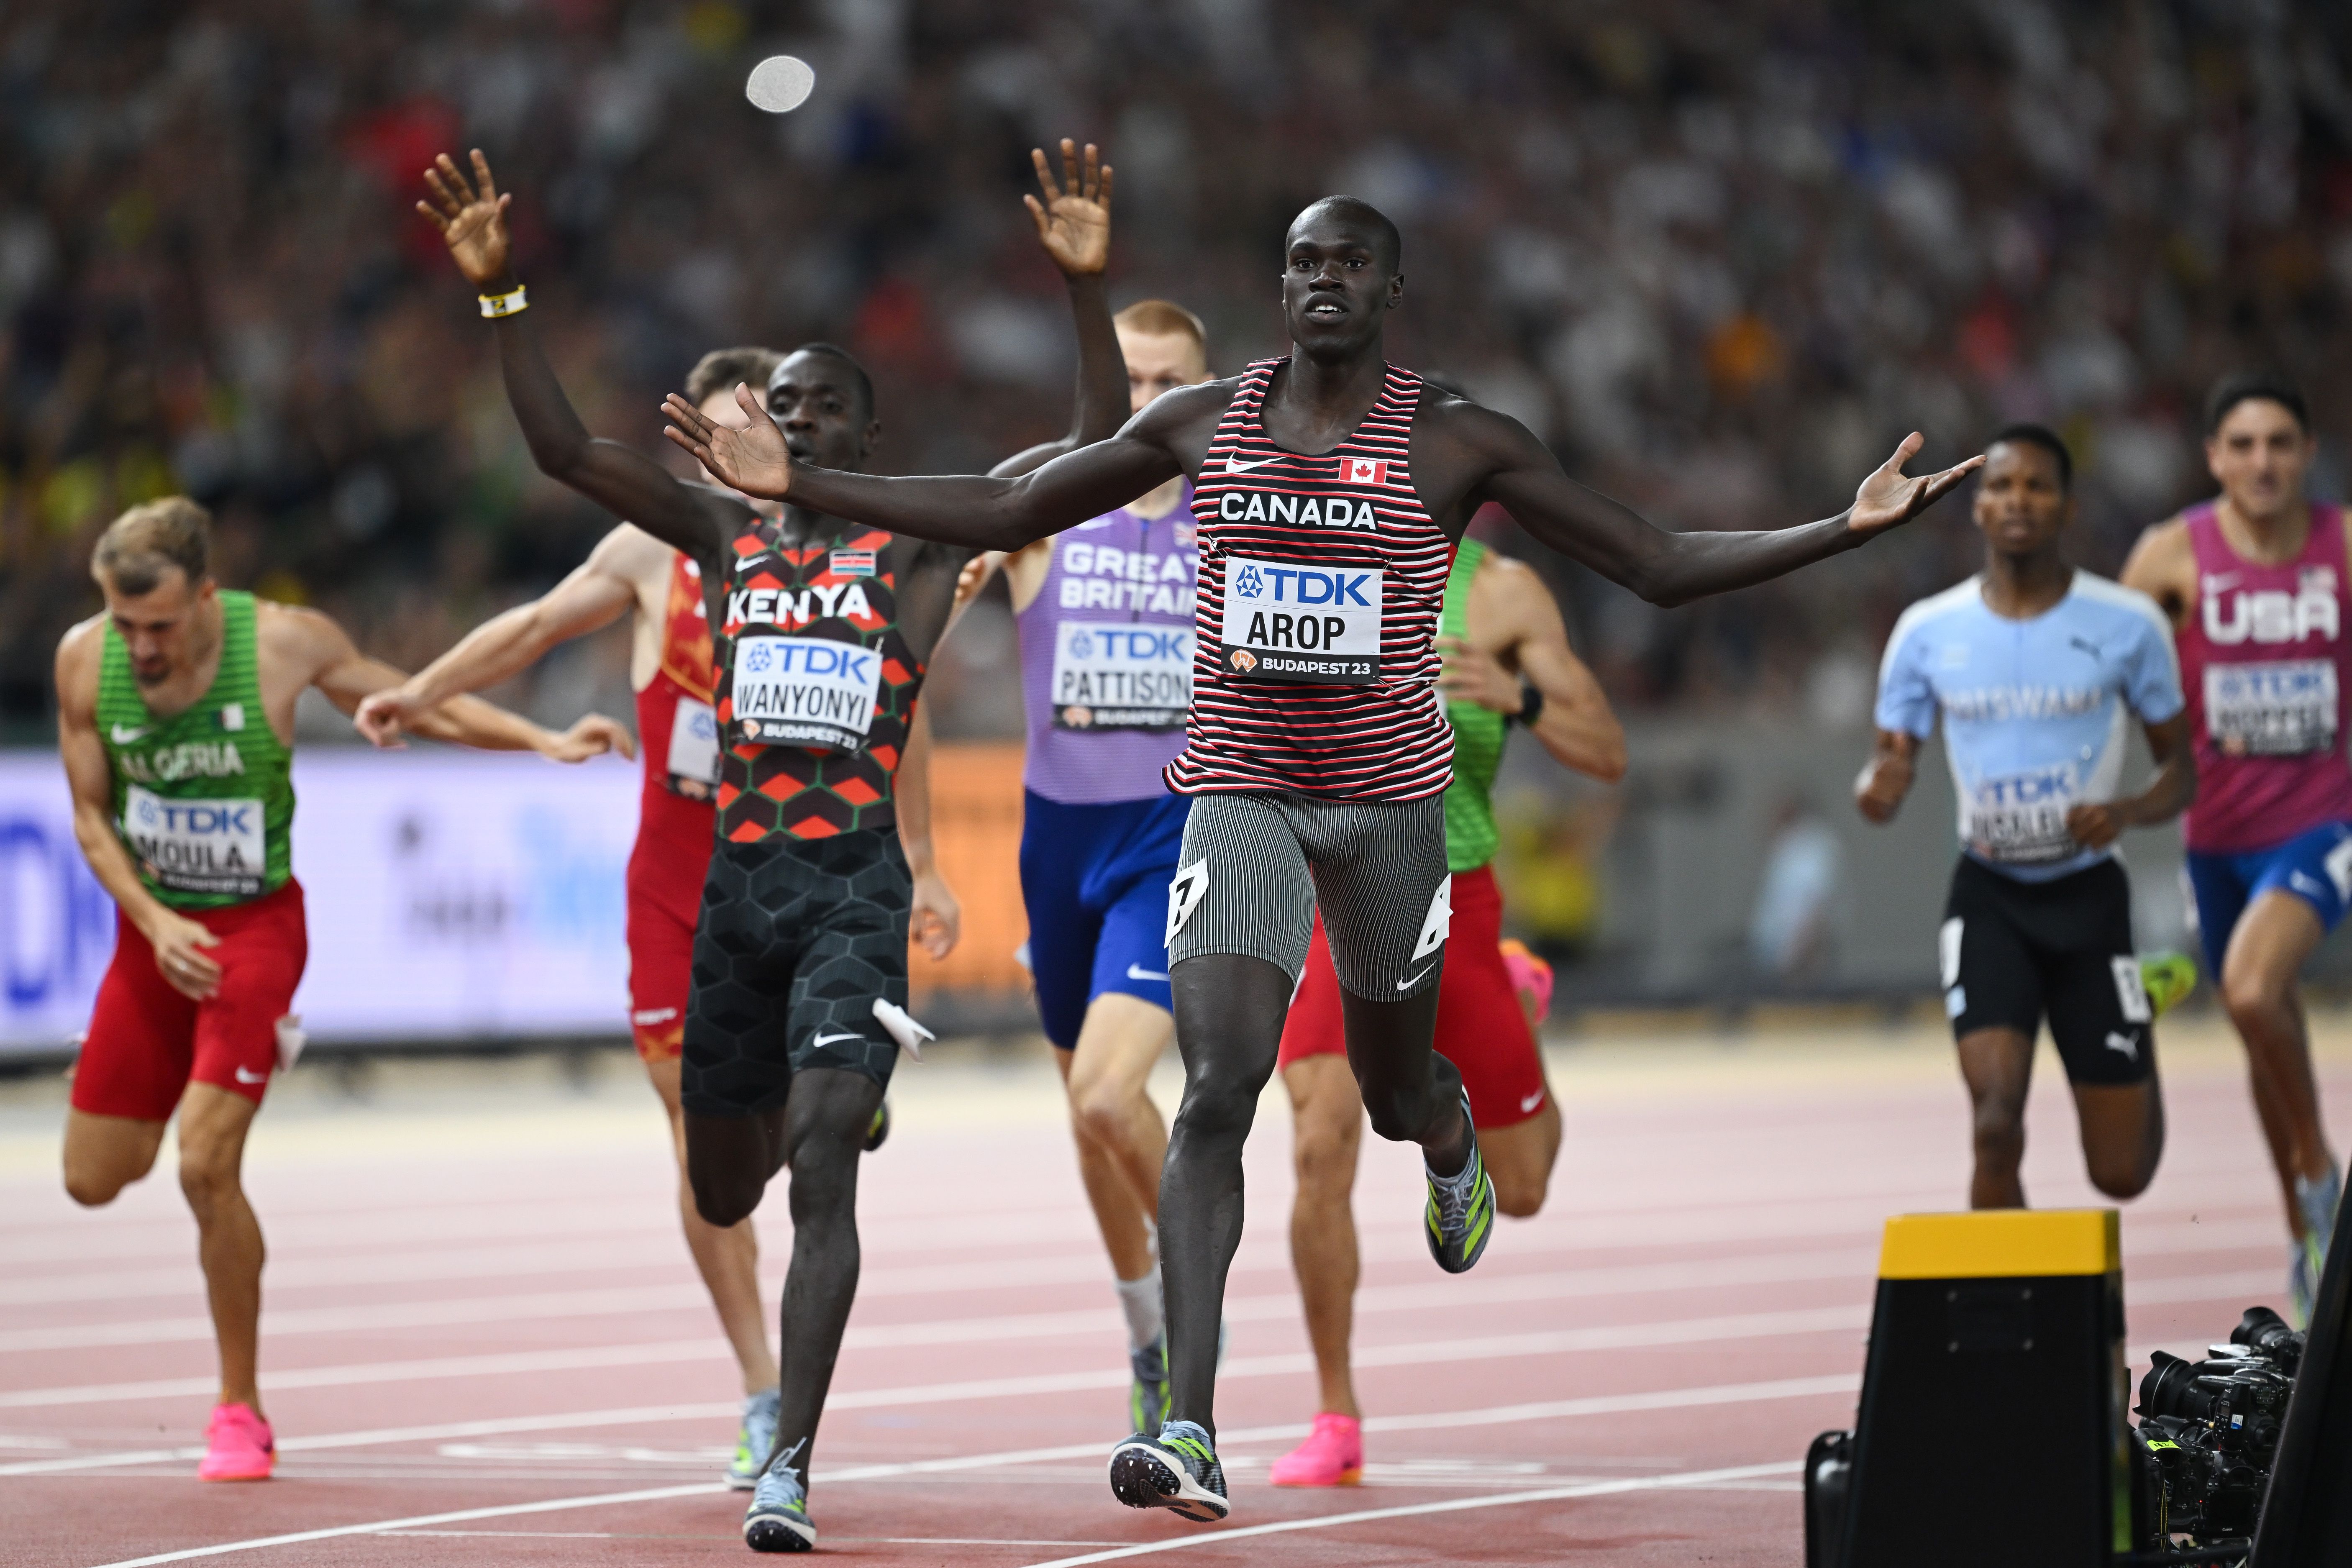 Marco Arop wins the 800m at the World Athletics Championships Budapest 23